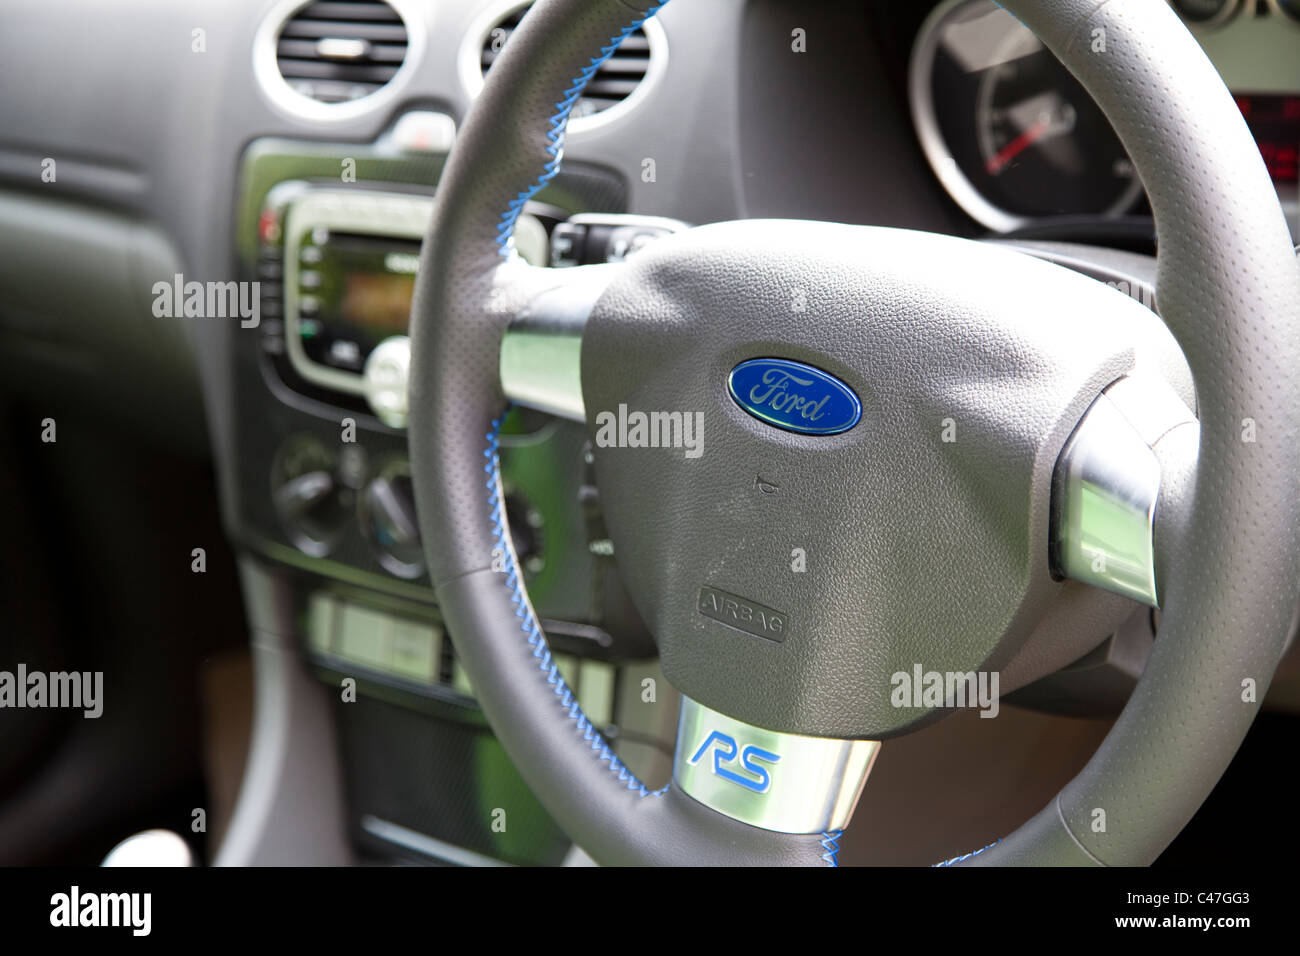 A Ford Focus Rs Steering Wheel And Interior England Uk Stock